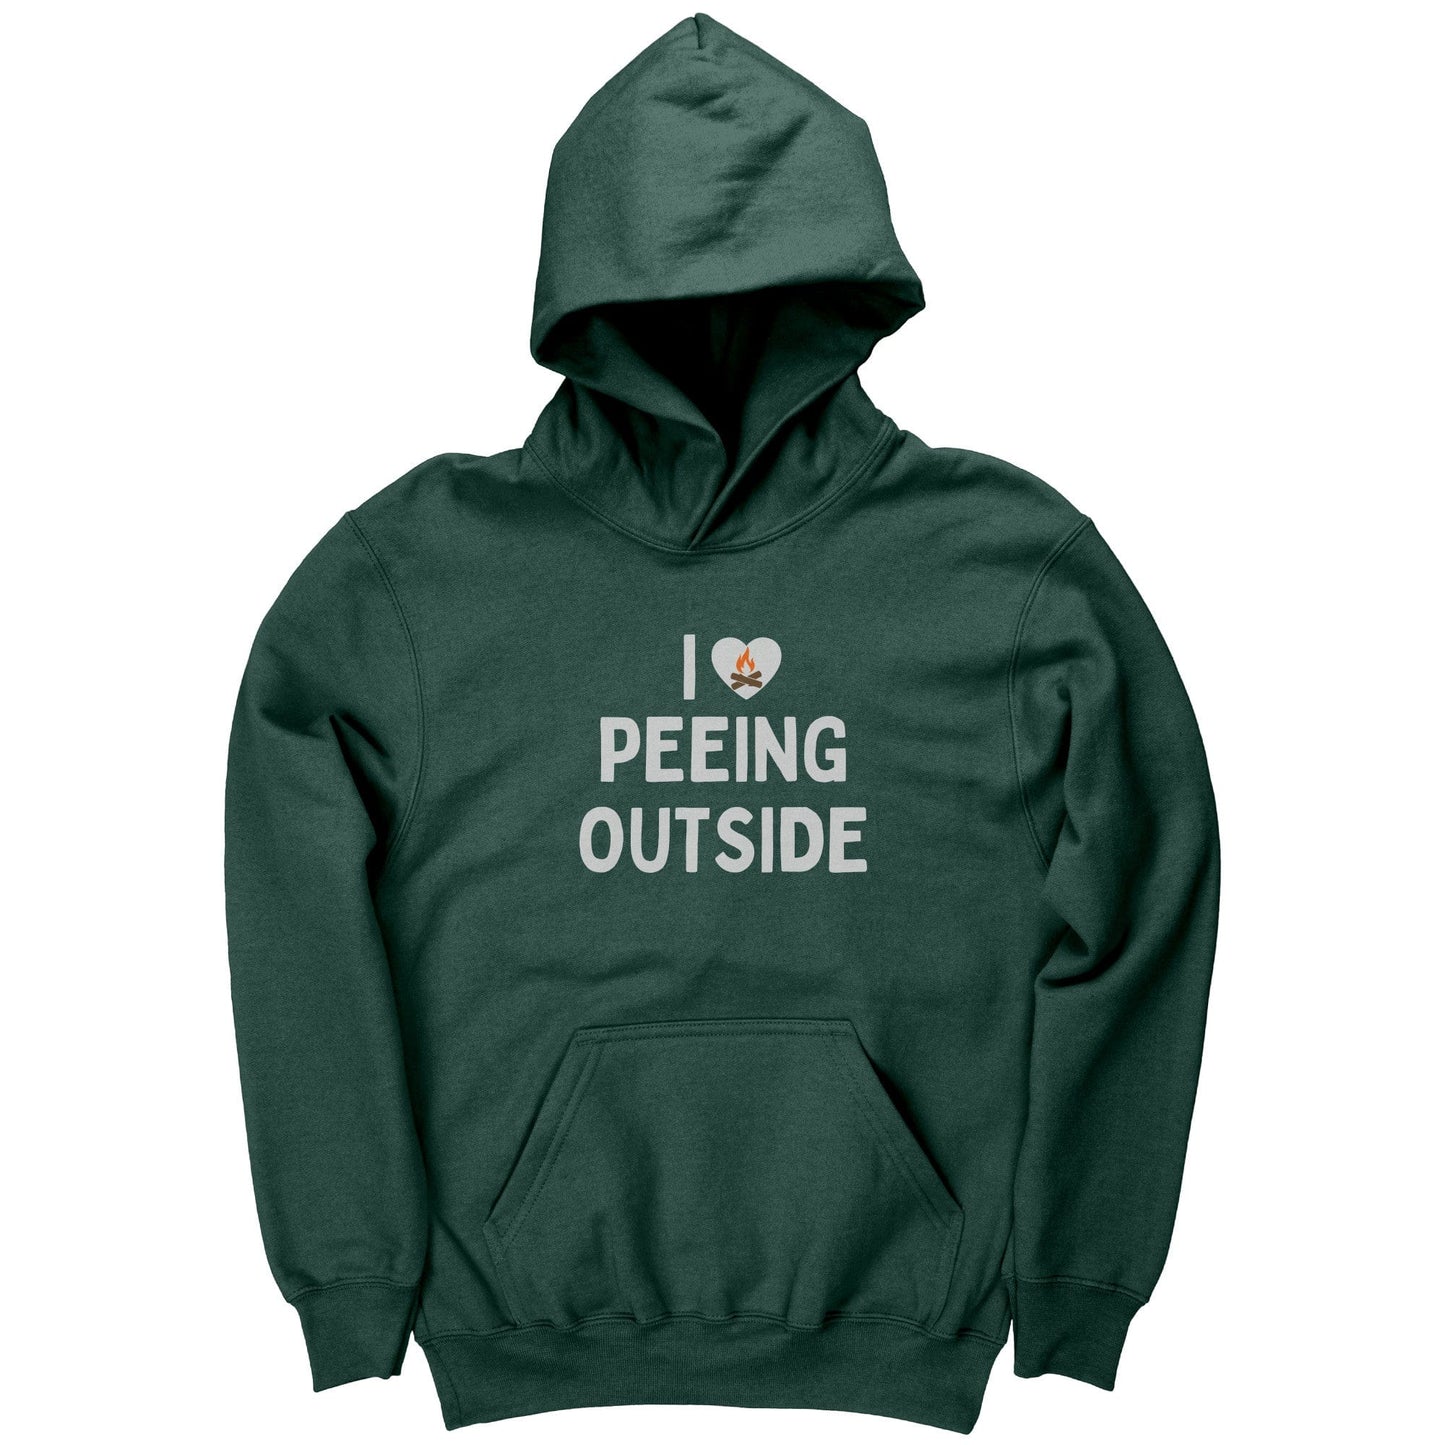 Funny "I Love Peeing Outside" Camping Kids Shirts and Hoodies